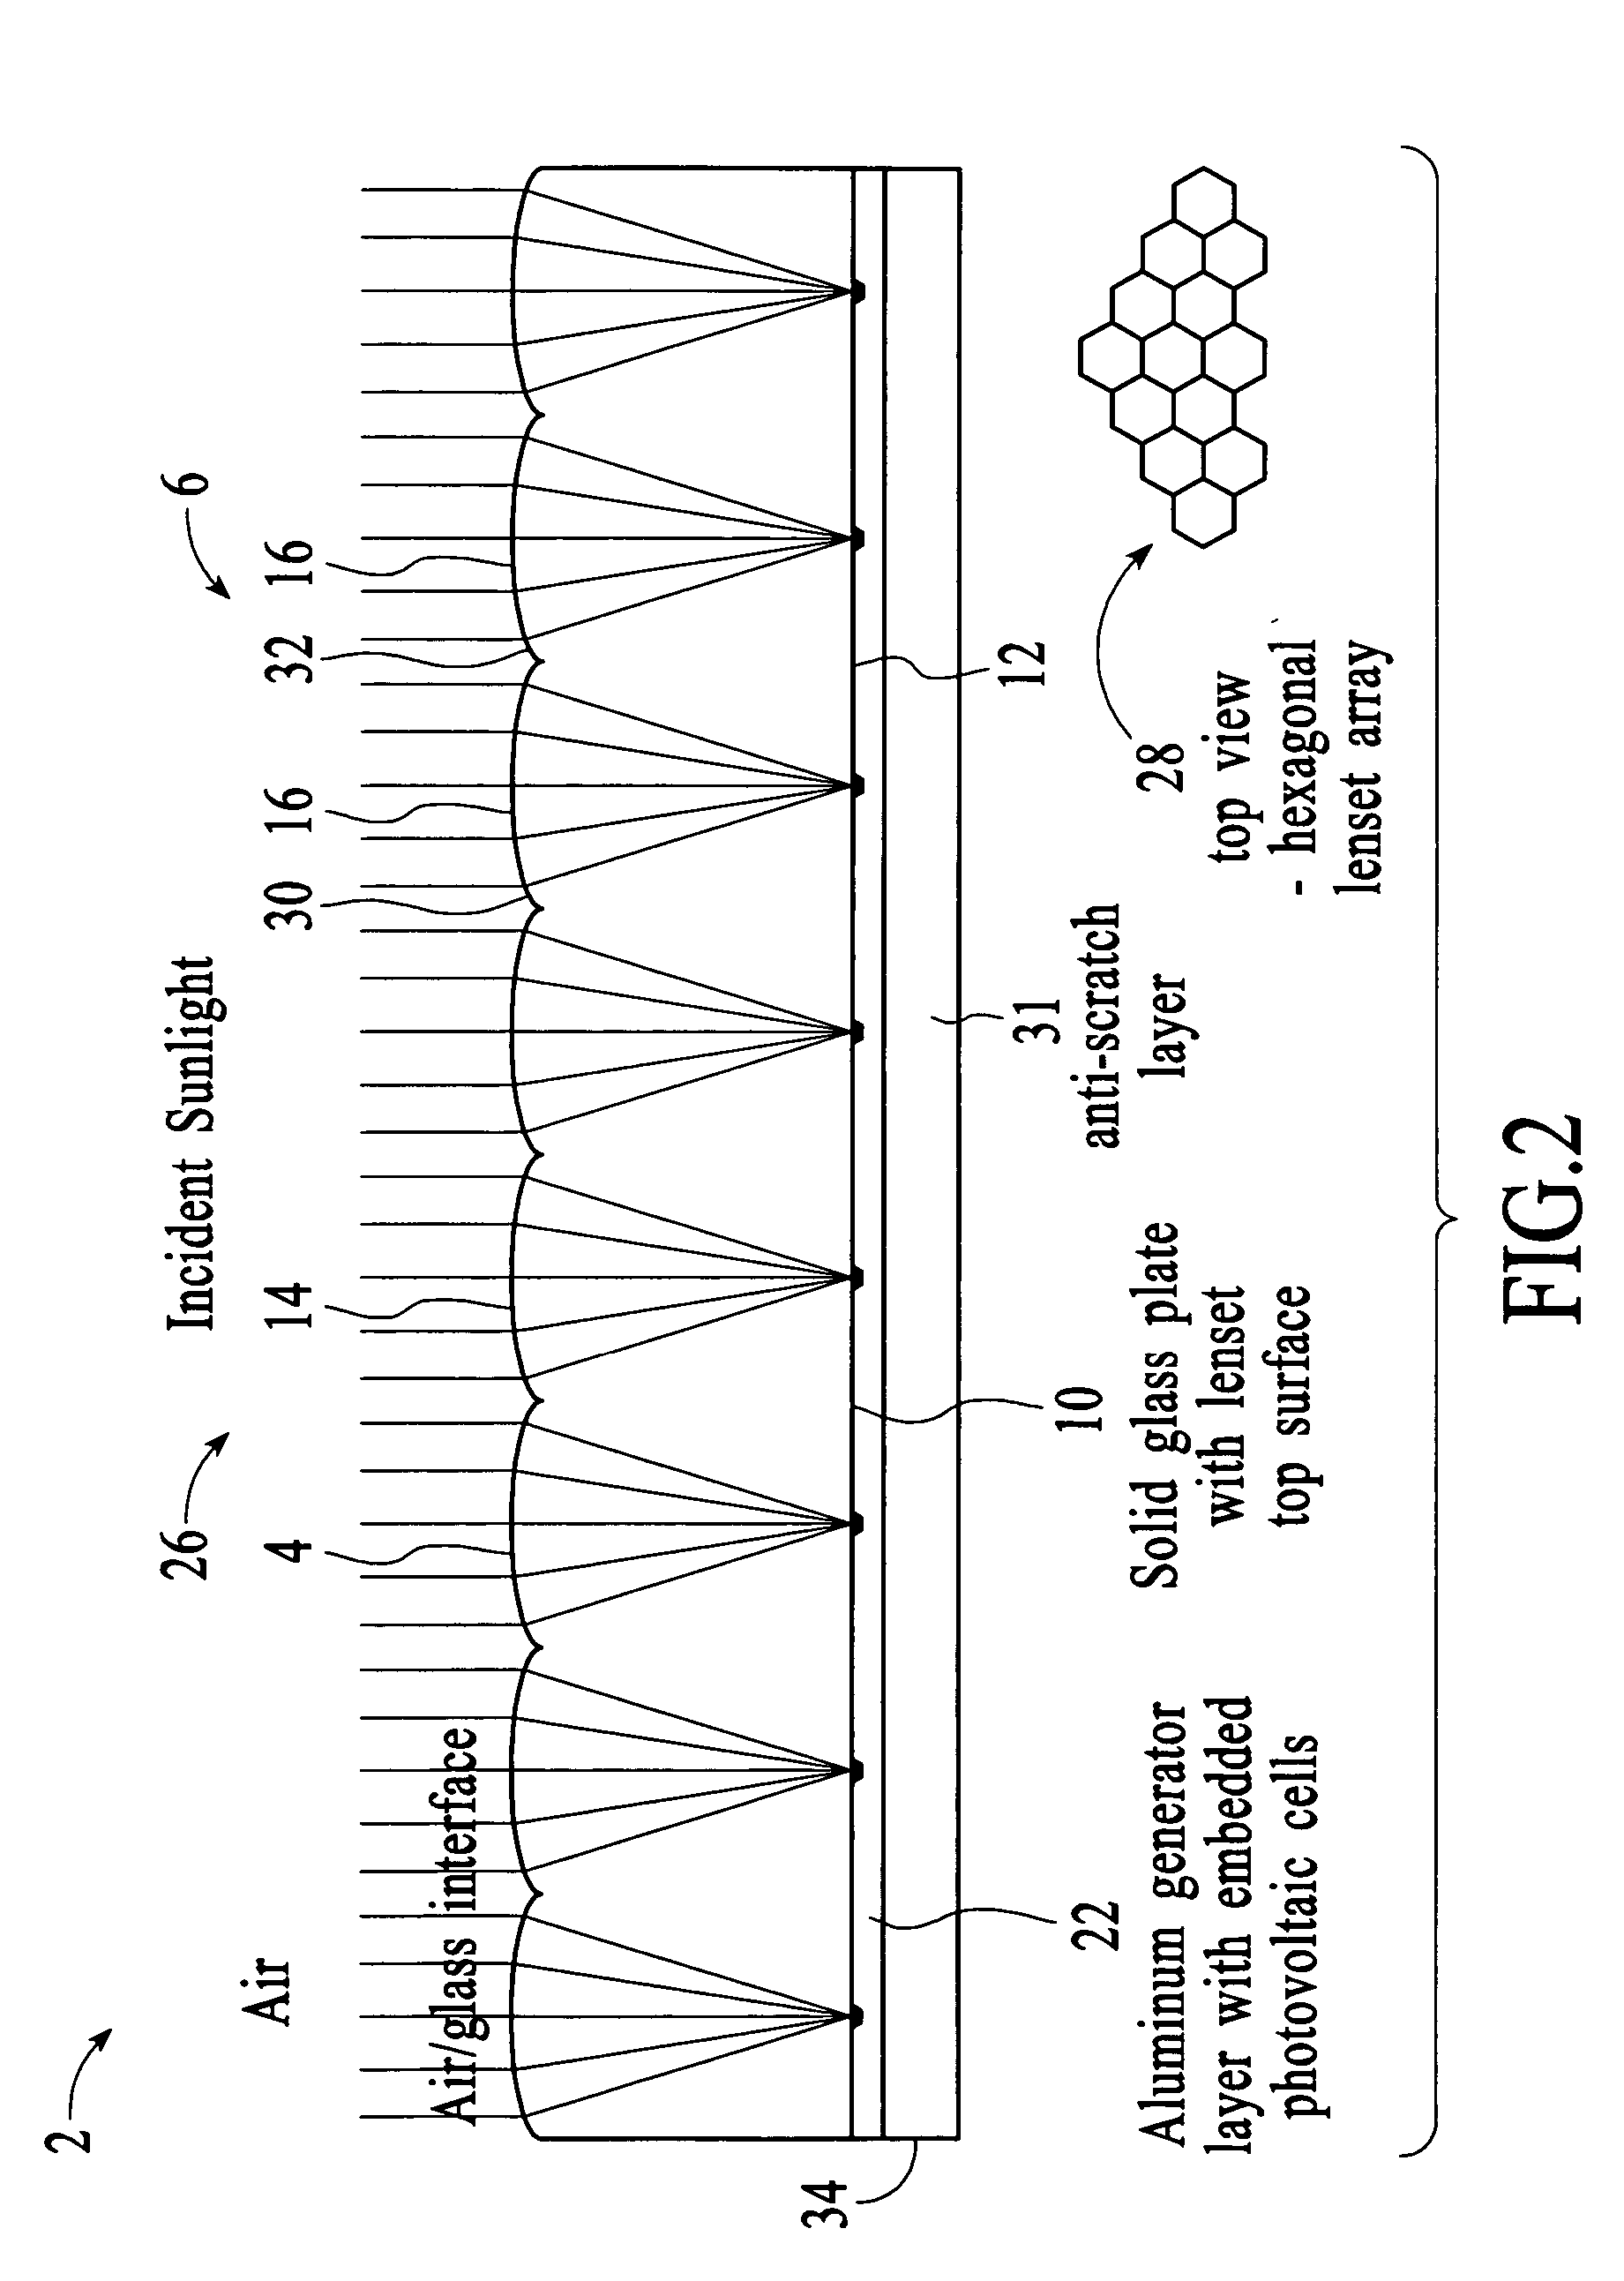 Method and apparatus for generation of electrical power from solar energy